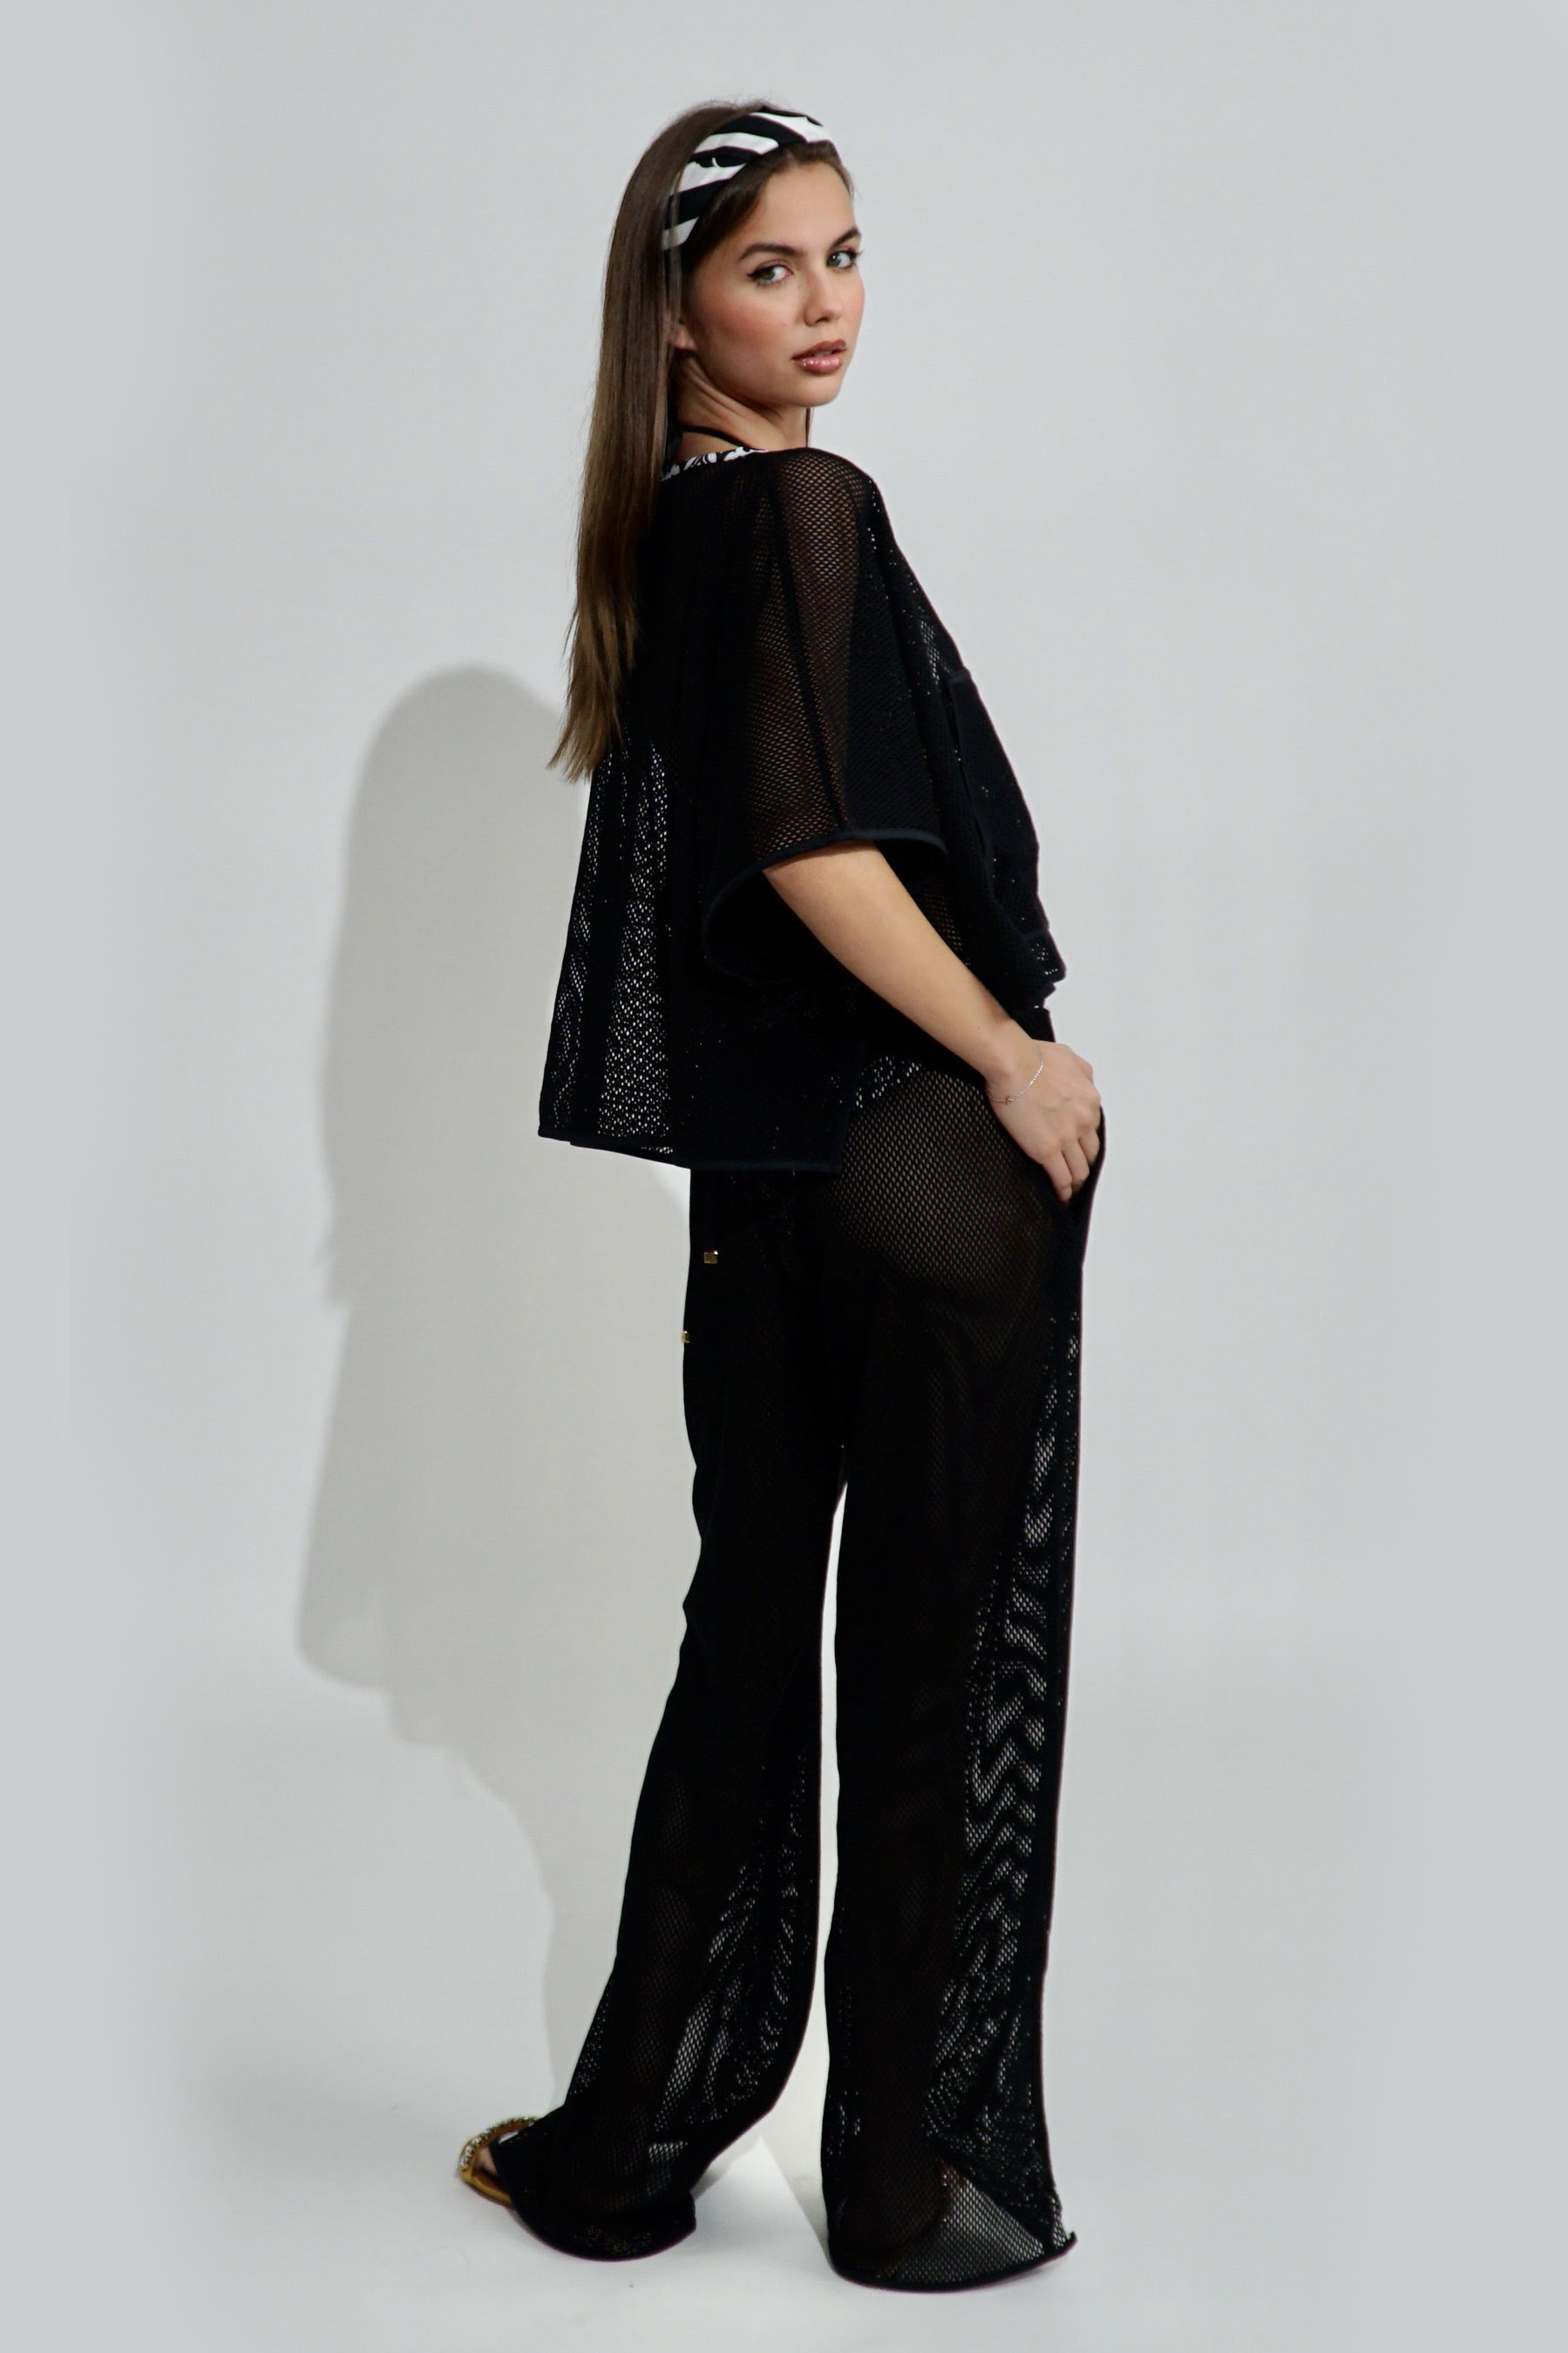 Portofino Net Lounge Pant with pockets in Black/Blk +Wht